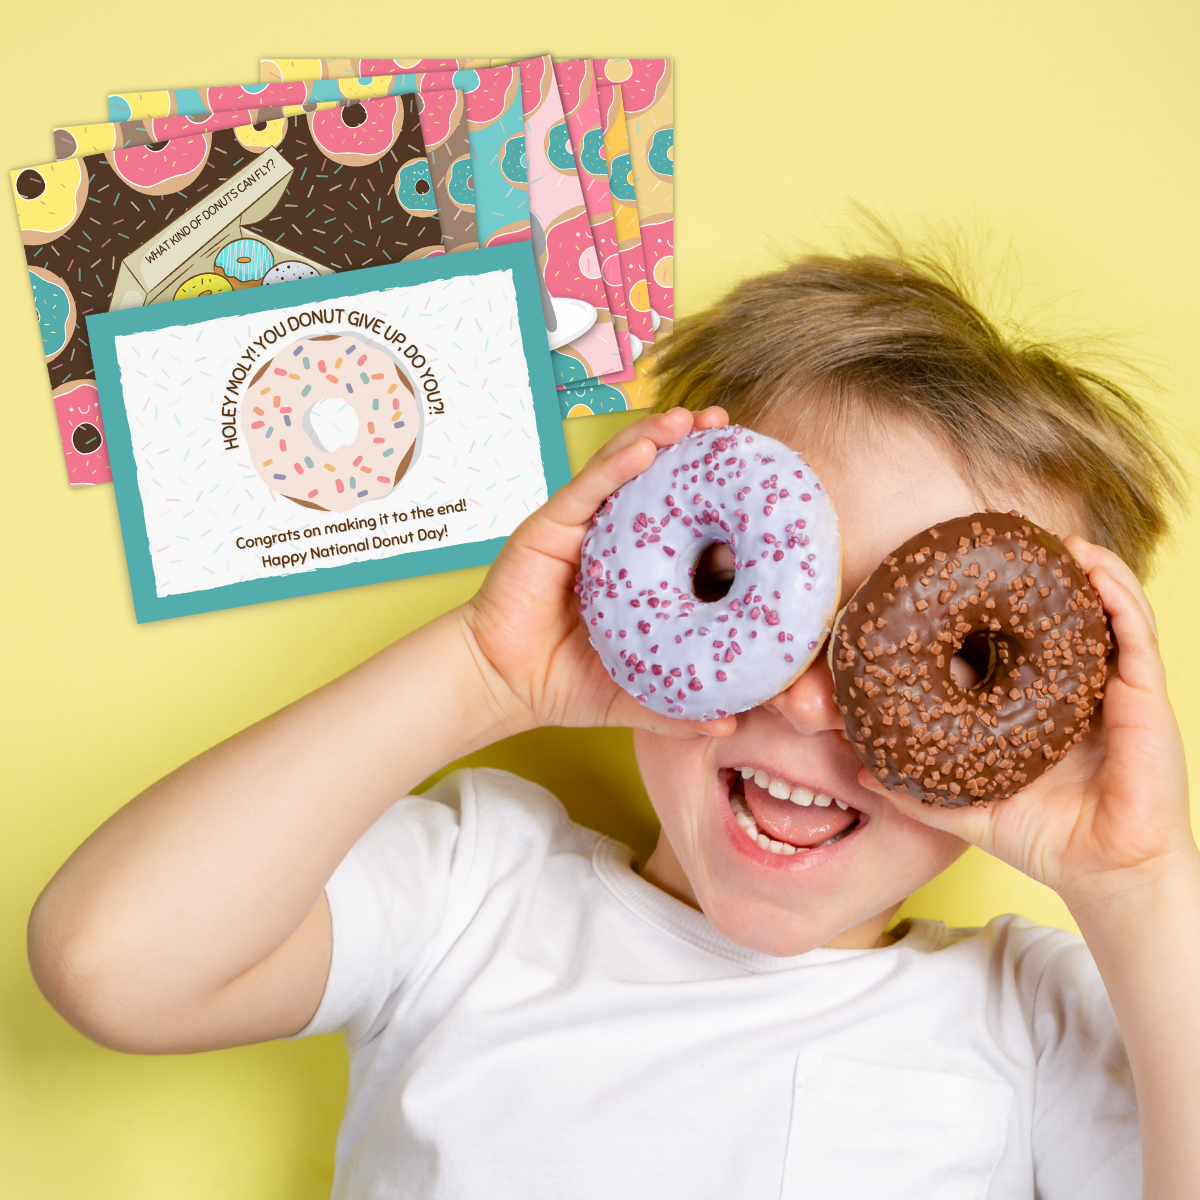 A boy puts donuts over his eyes and smiles next to the cards from his National Donut Day treasure hunt.